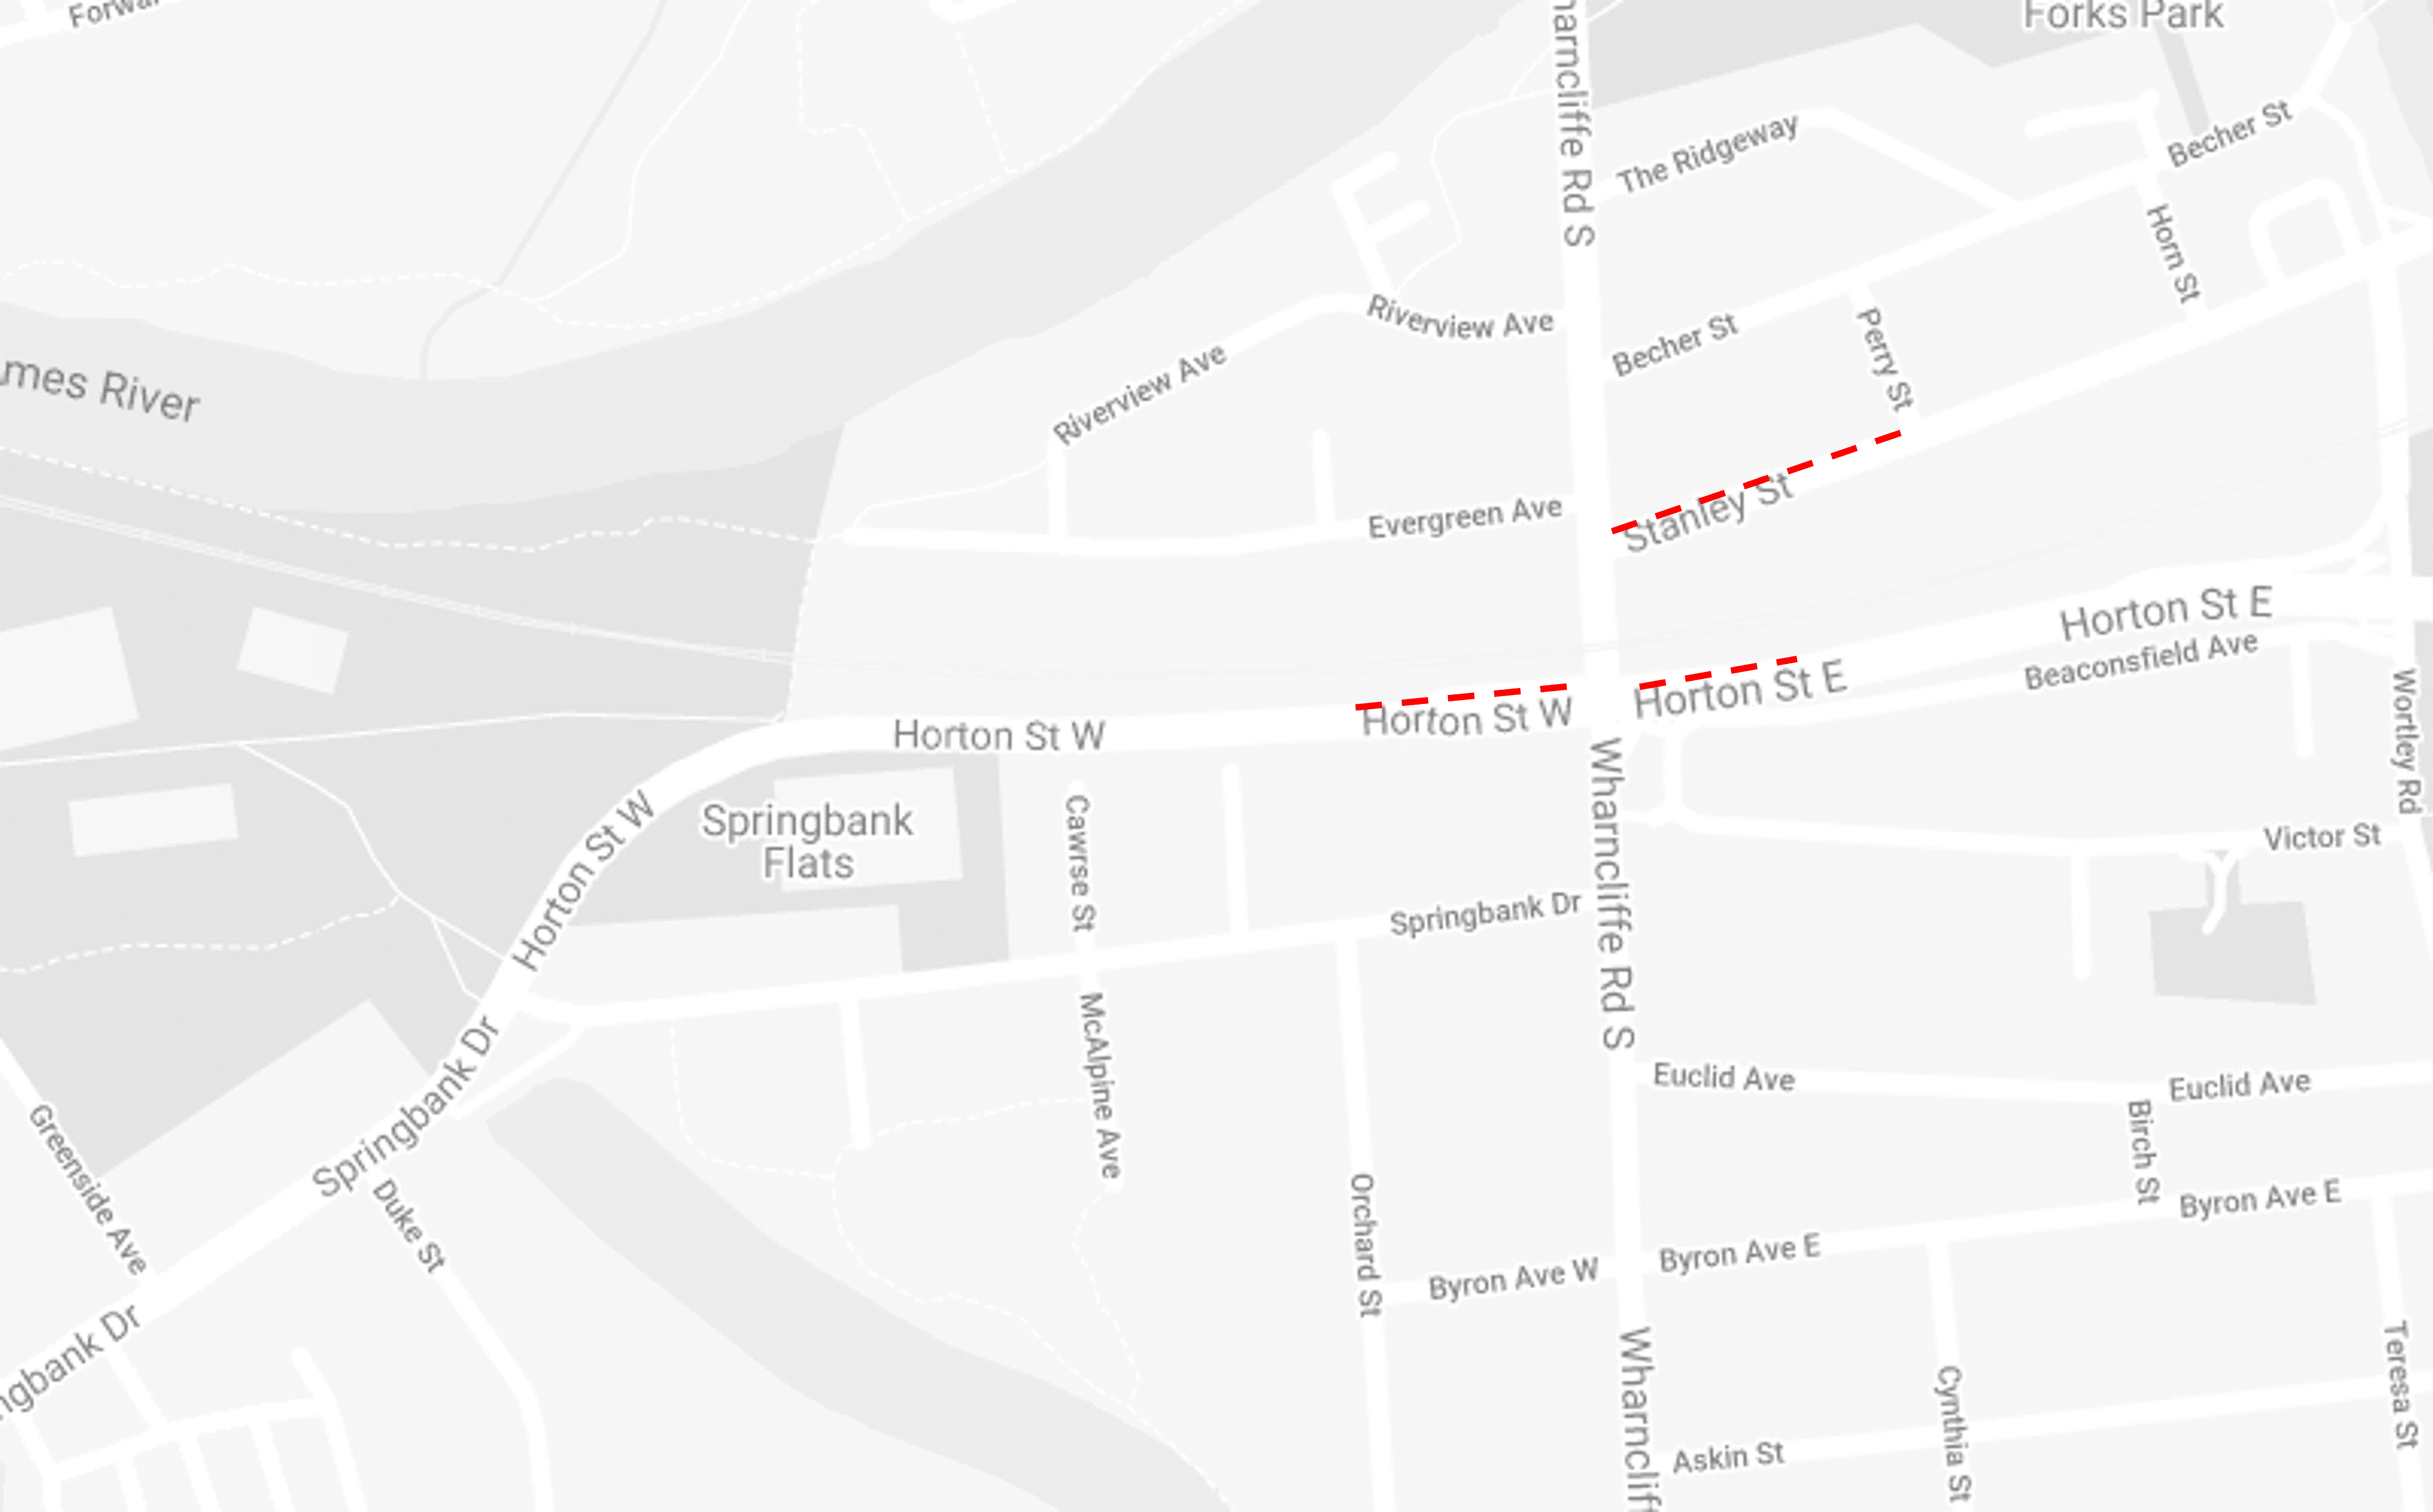 Map of Horton Street and Stanley Street lane restrictions